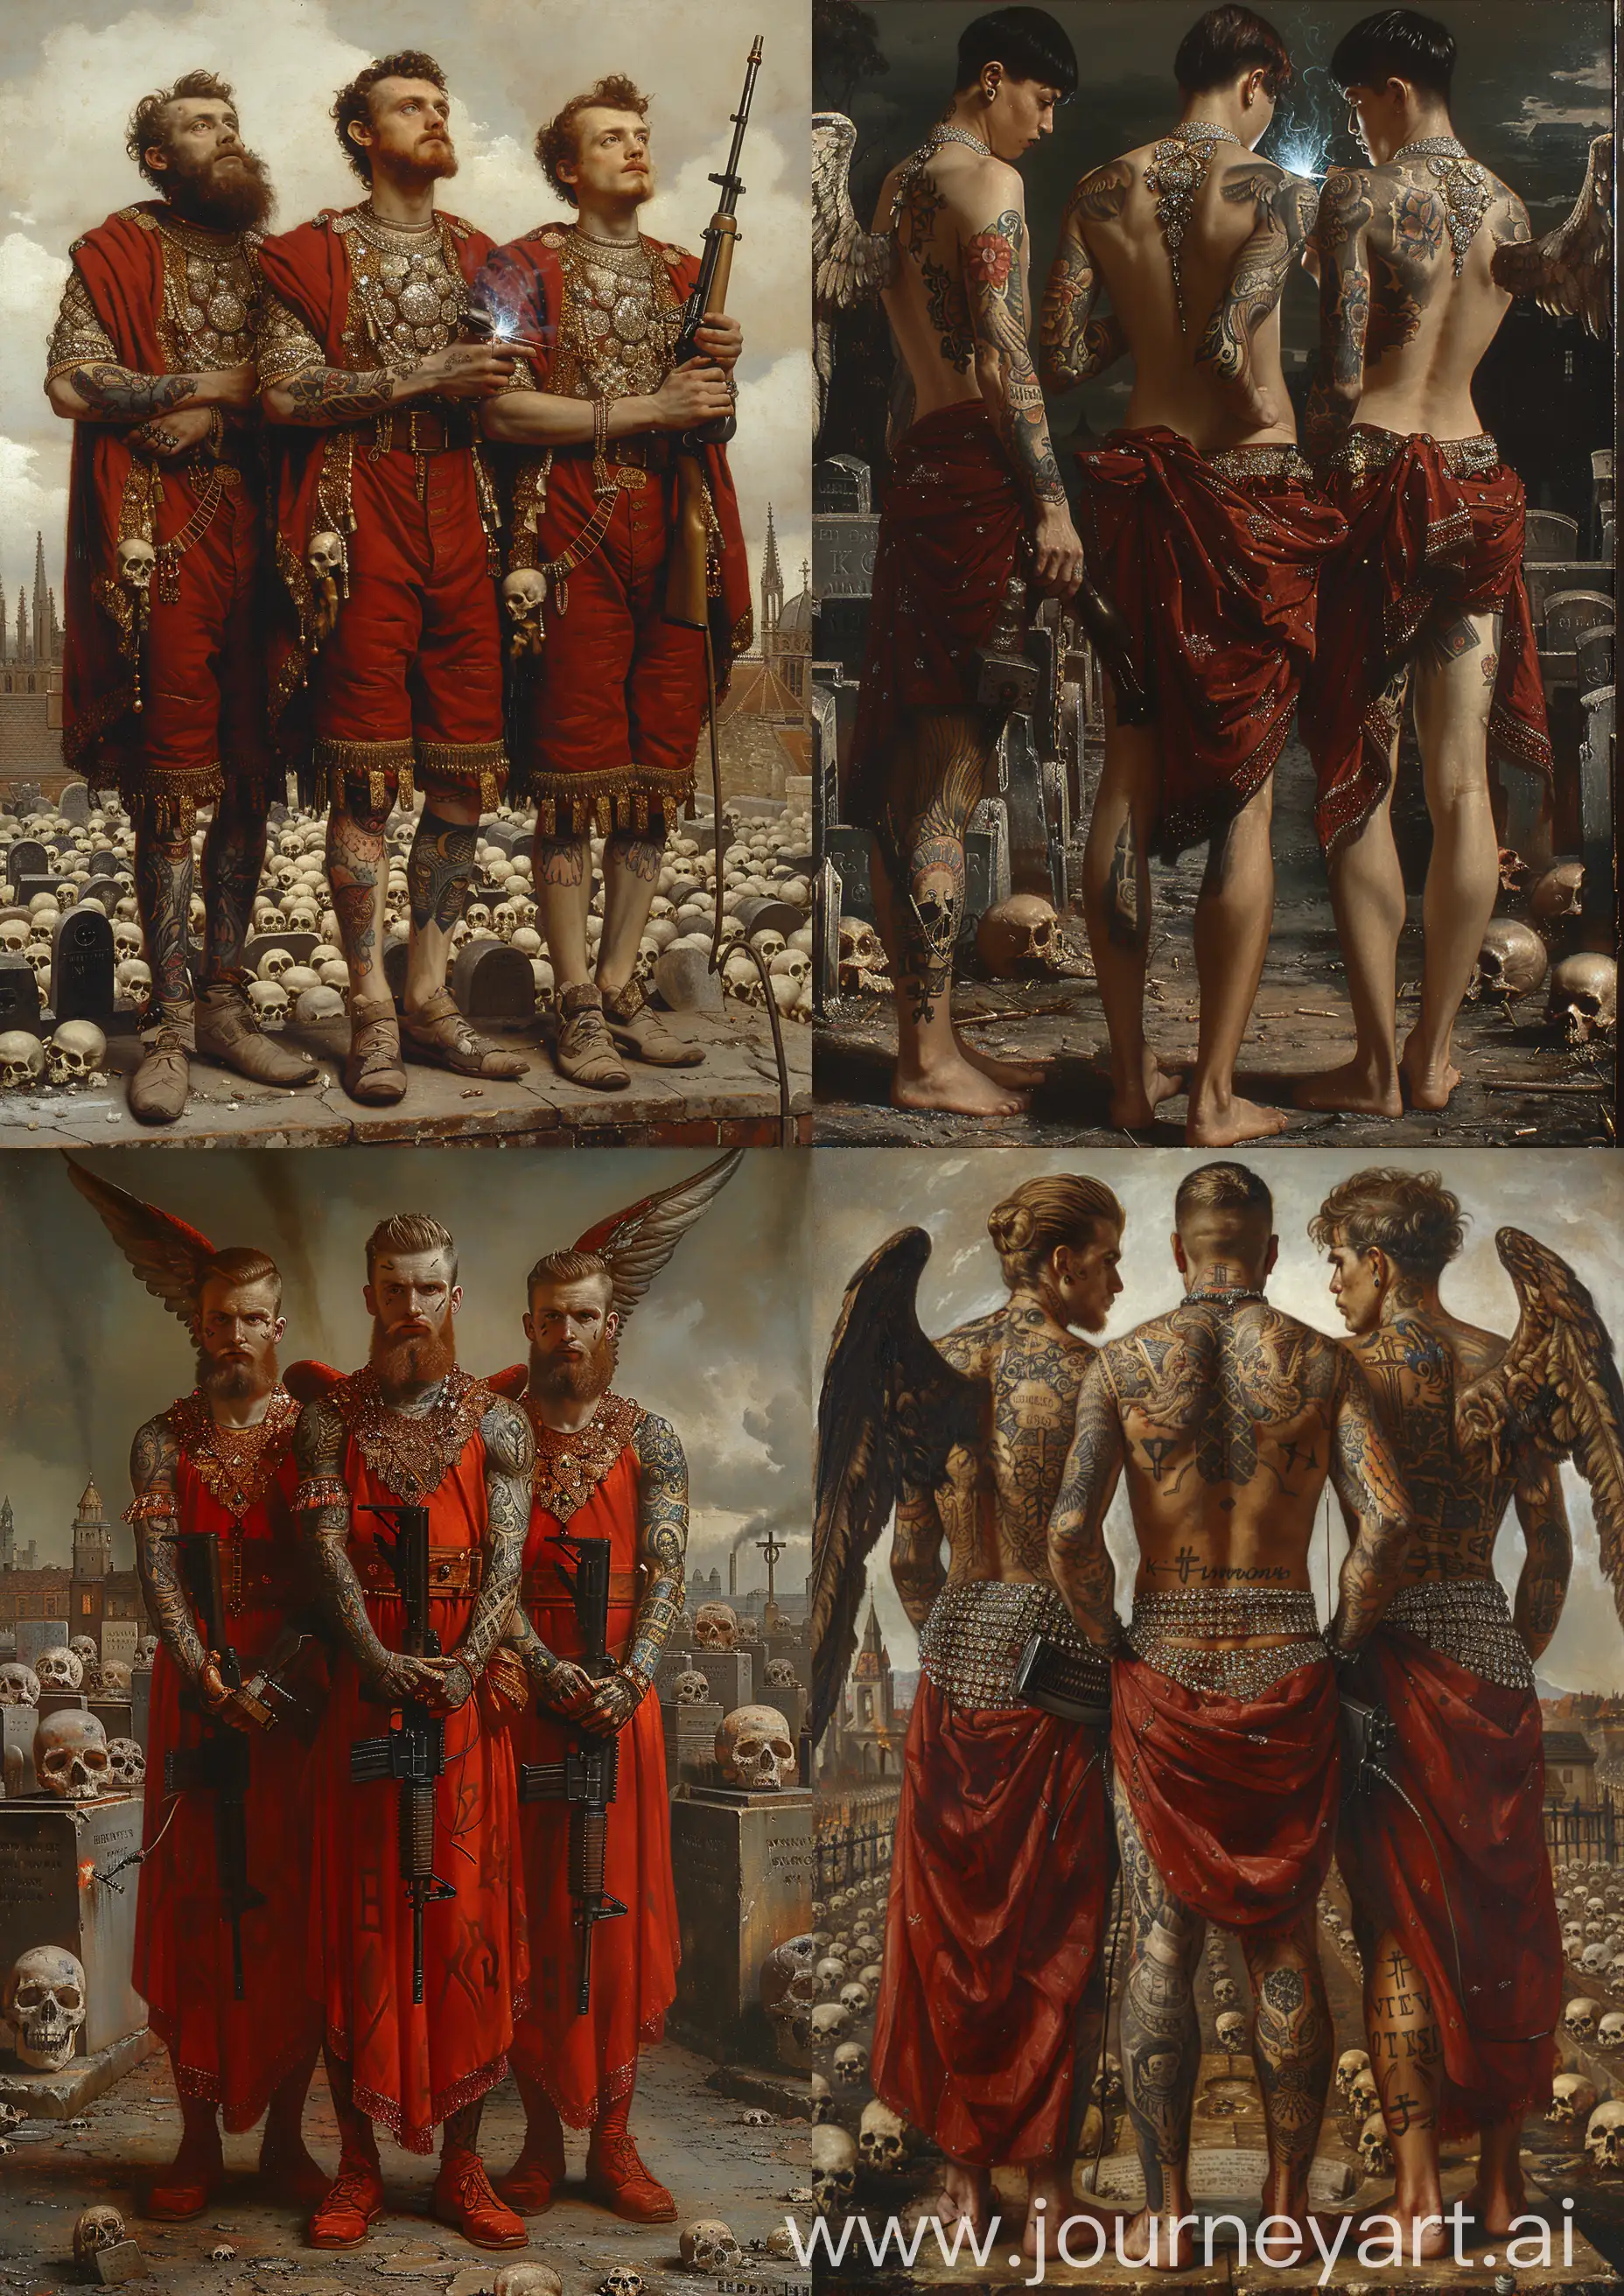 Tattooed-Male-Angel-Warriors-in-Red-Clothes-with-Kalashnikovs-on-Skullfilled-Cemetery